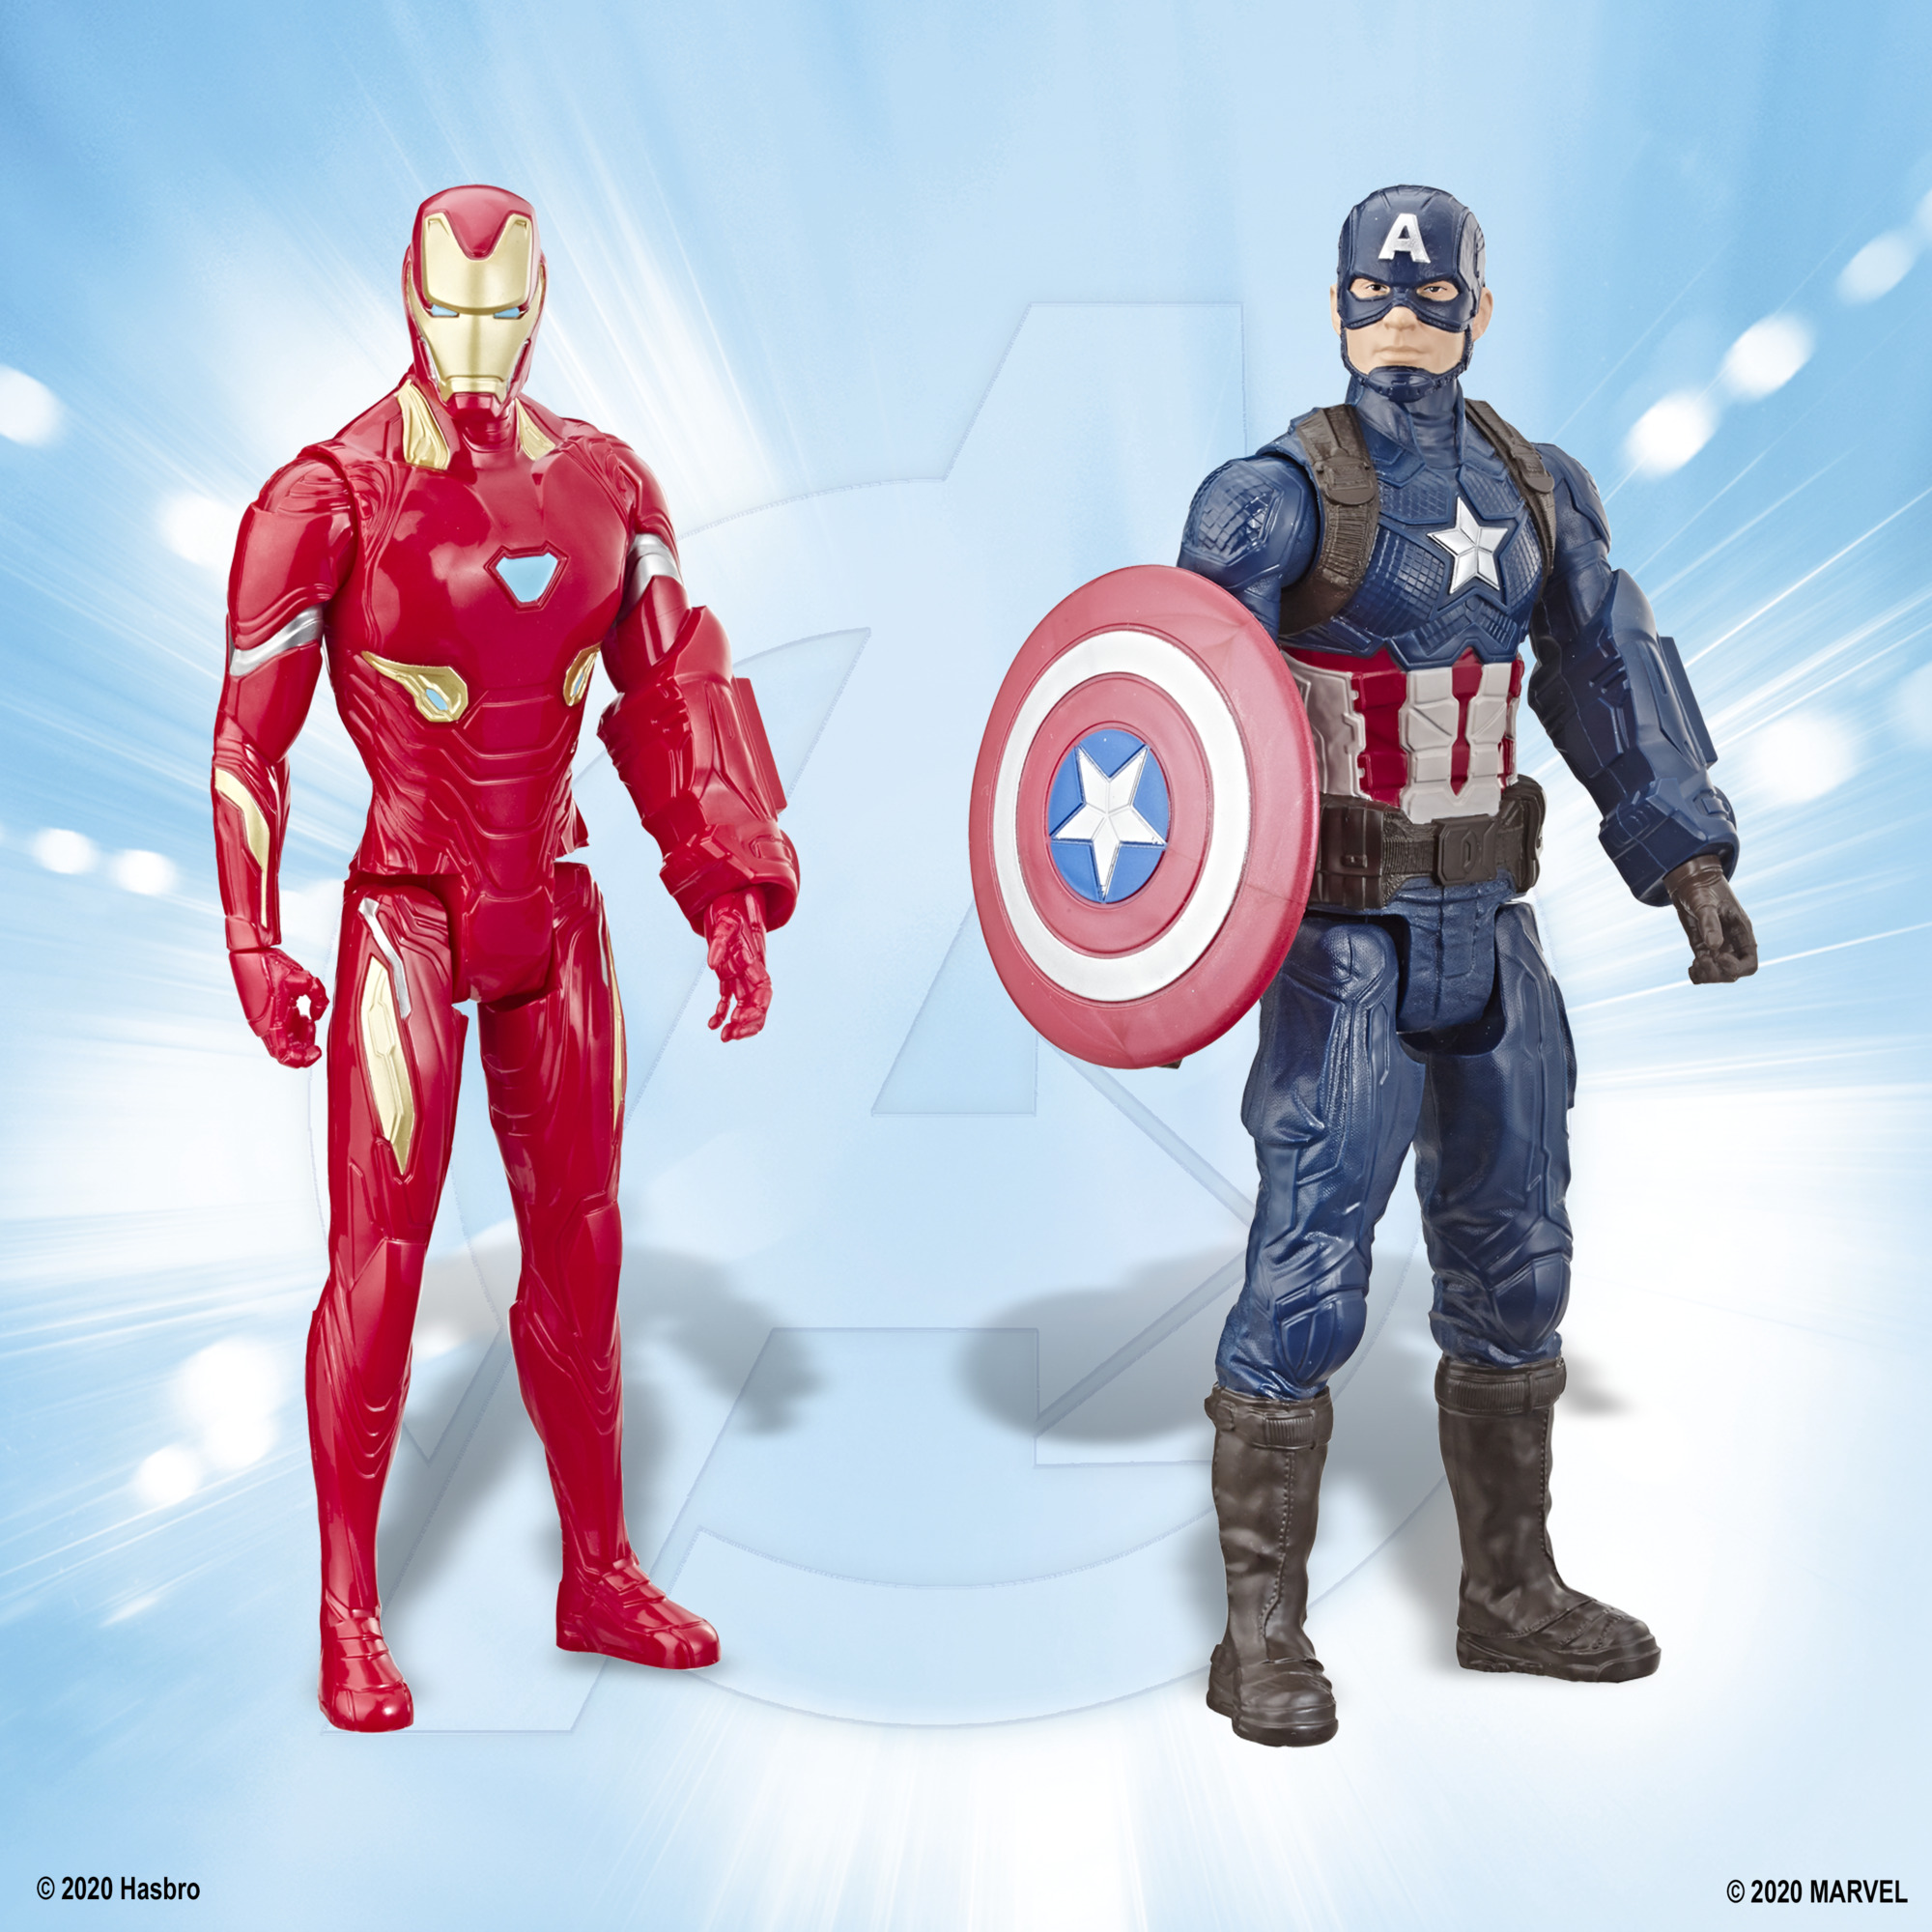 Marvel Avengers: Titan Hero Series Captain America, Iron Spider, Black Panther, and Iron Man Kids Toy Action Figure for Boys and Girls (12") - image 4 of 7